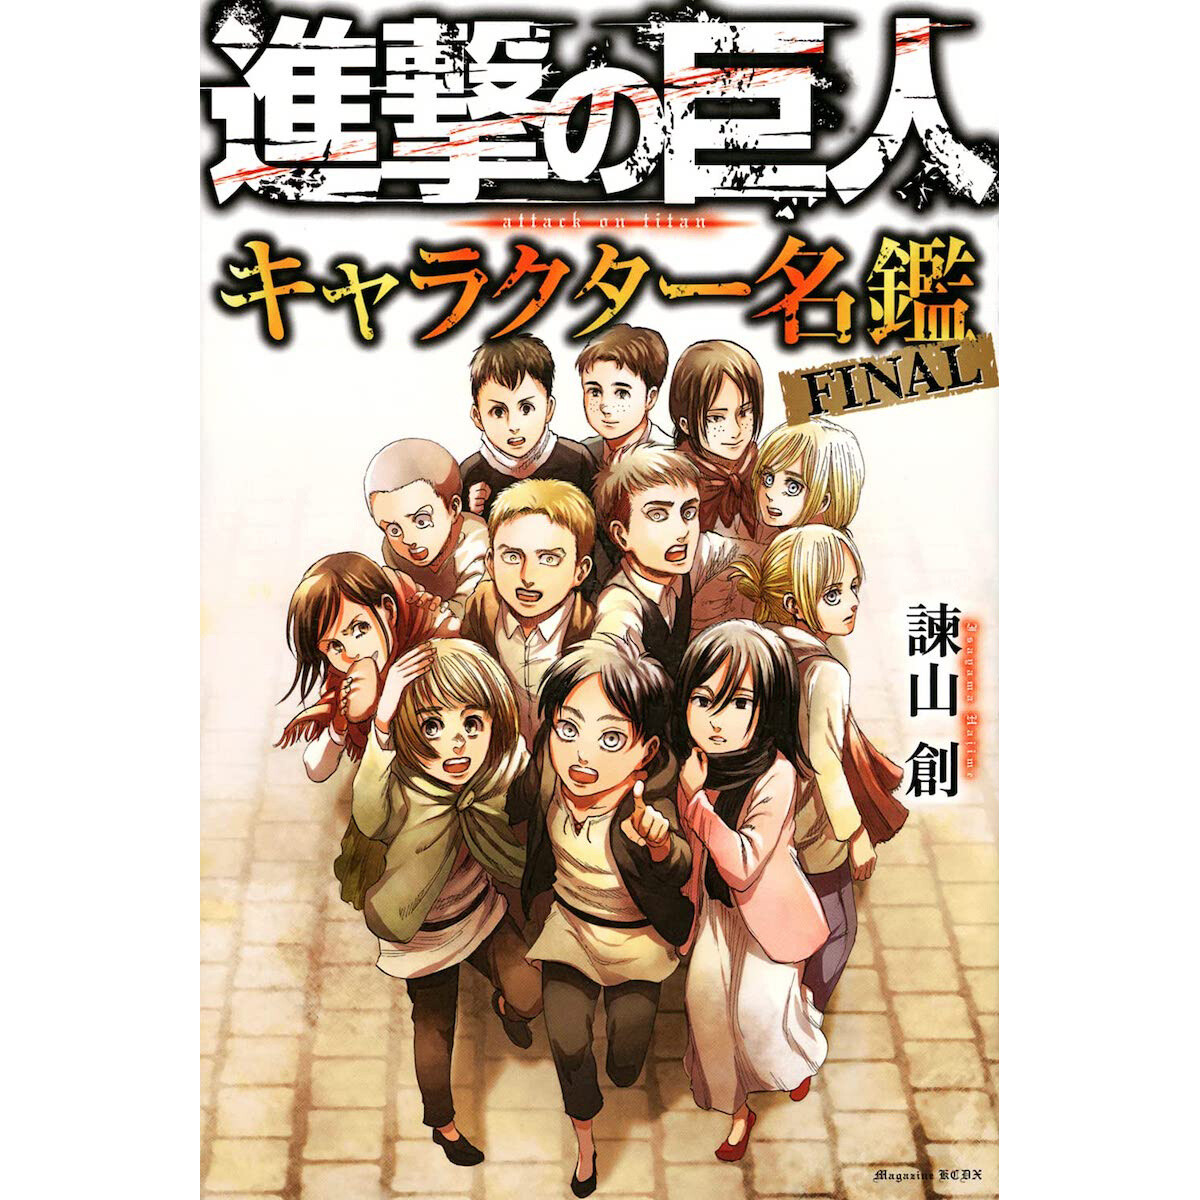 Attack on Titan: The Anime Guide (Attack by Isayama, Hajime